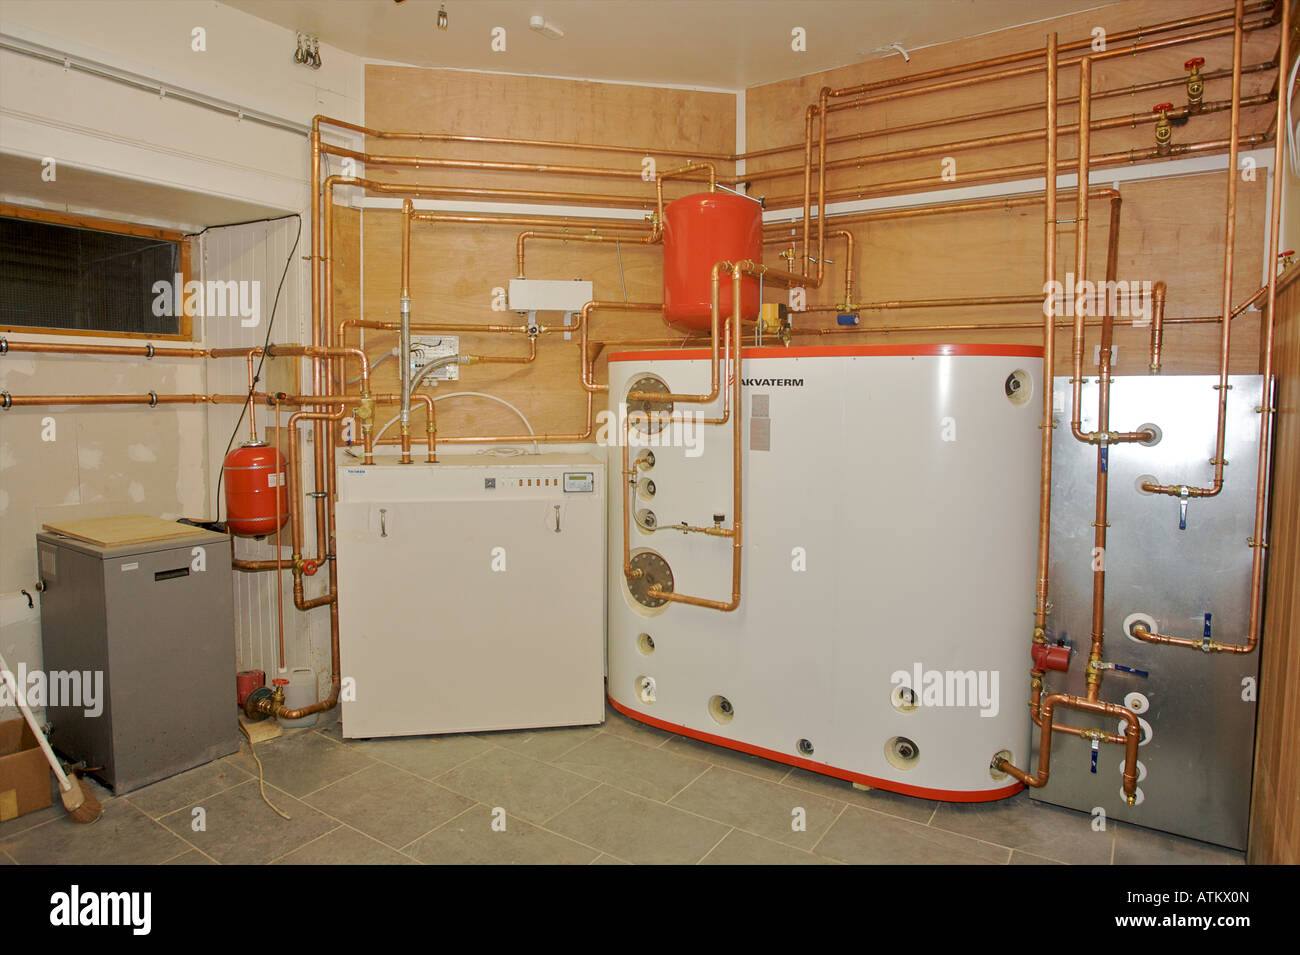 Geo-thermal heat exchanger and hot water tank for a large heating system Stock Photo